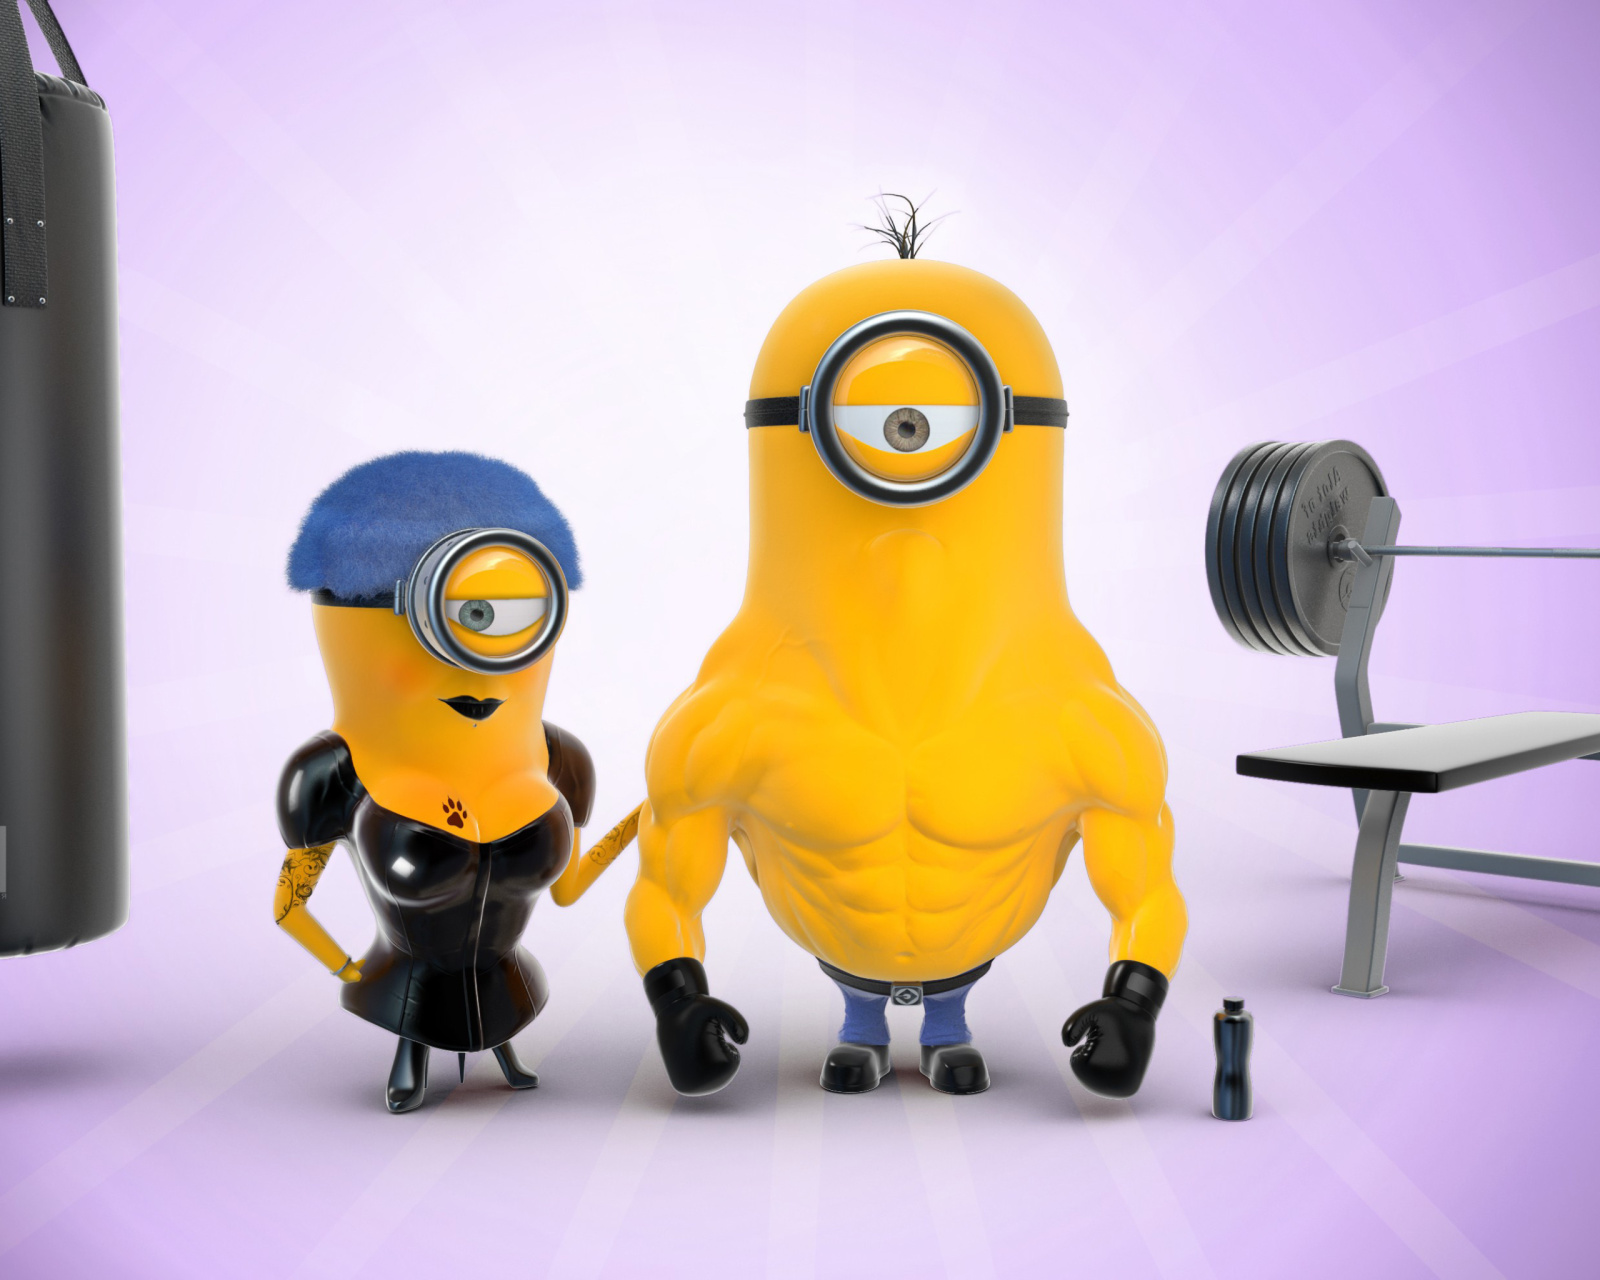 Despicable Me 2 in Gym screenshot #1 1600x1280